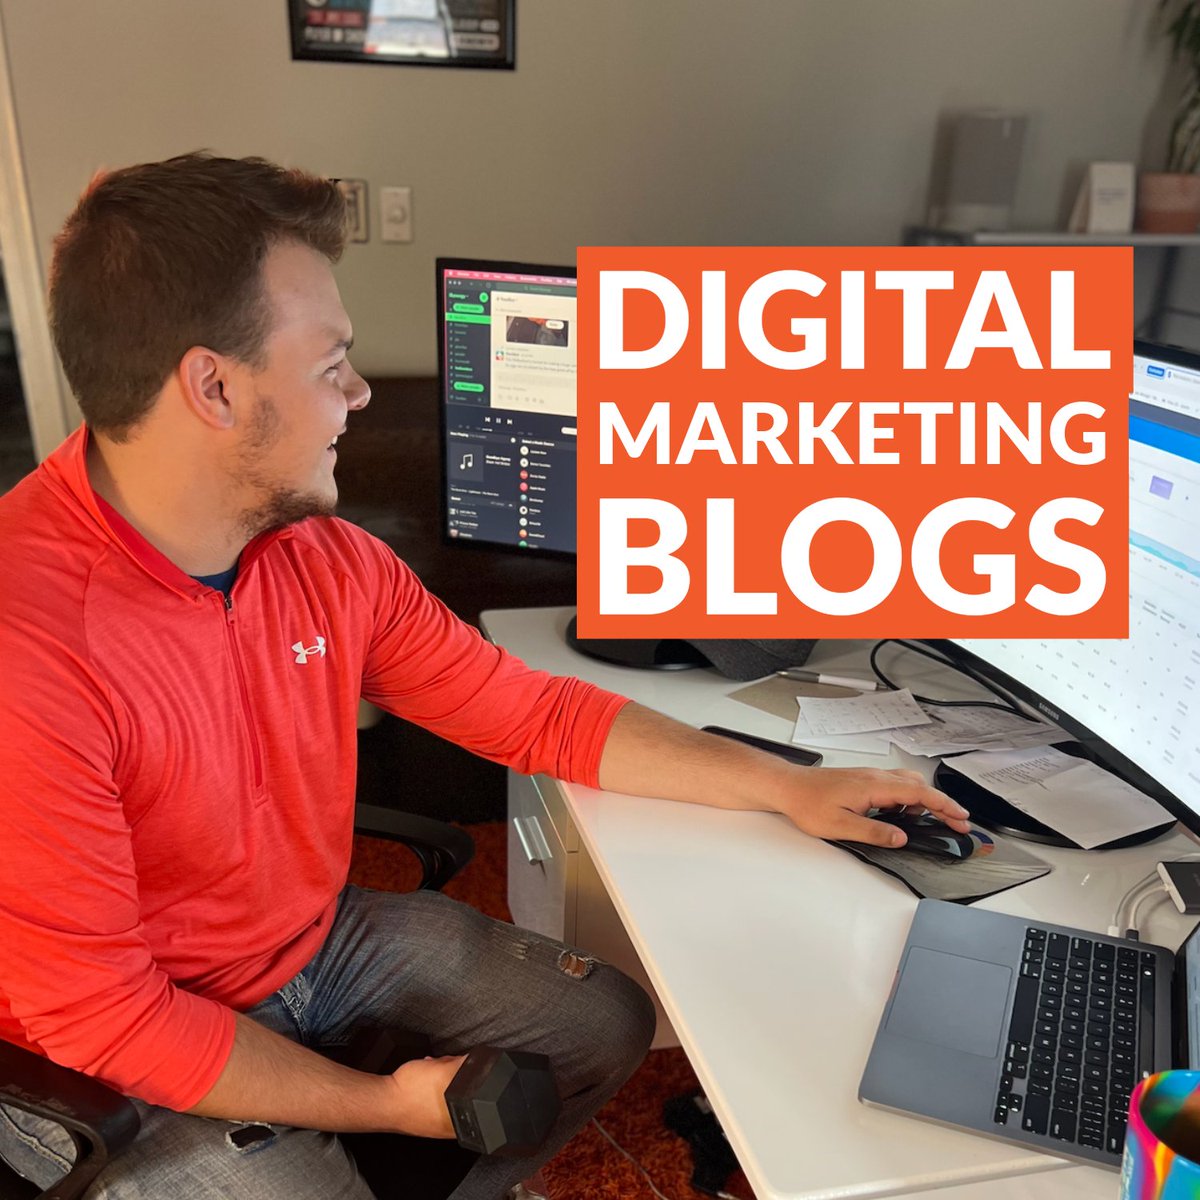 We've got blogs for all things marketing.

We're also Google partners, so instead of asking them about marketing, just ask us!

Check out our blogs!

#GetLifted